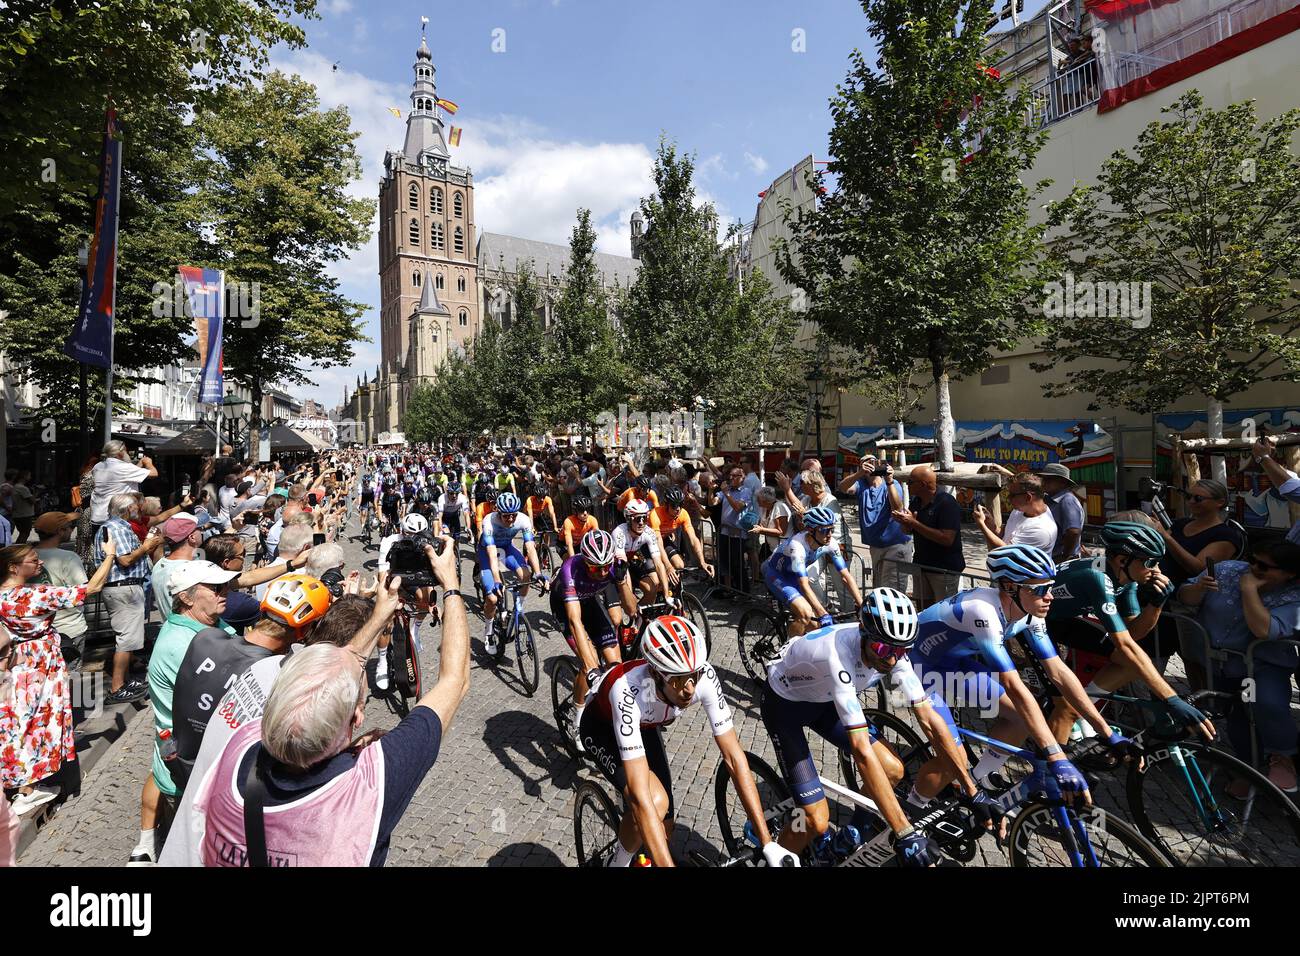 DEN BOSCH - The peloton during the start of the second stage of the Vuelta a Espana (Vuelta a Espana). The second stage of the Vuelta goes from Den Bosch to Utrecht. Stock Photo